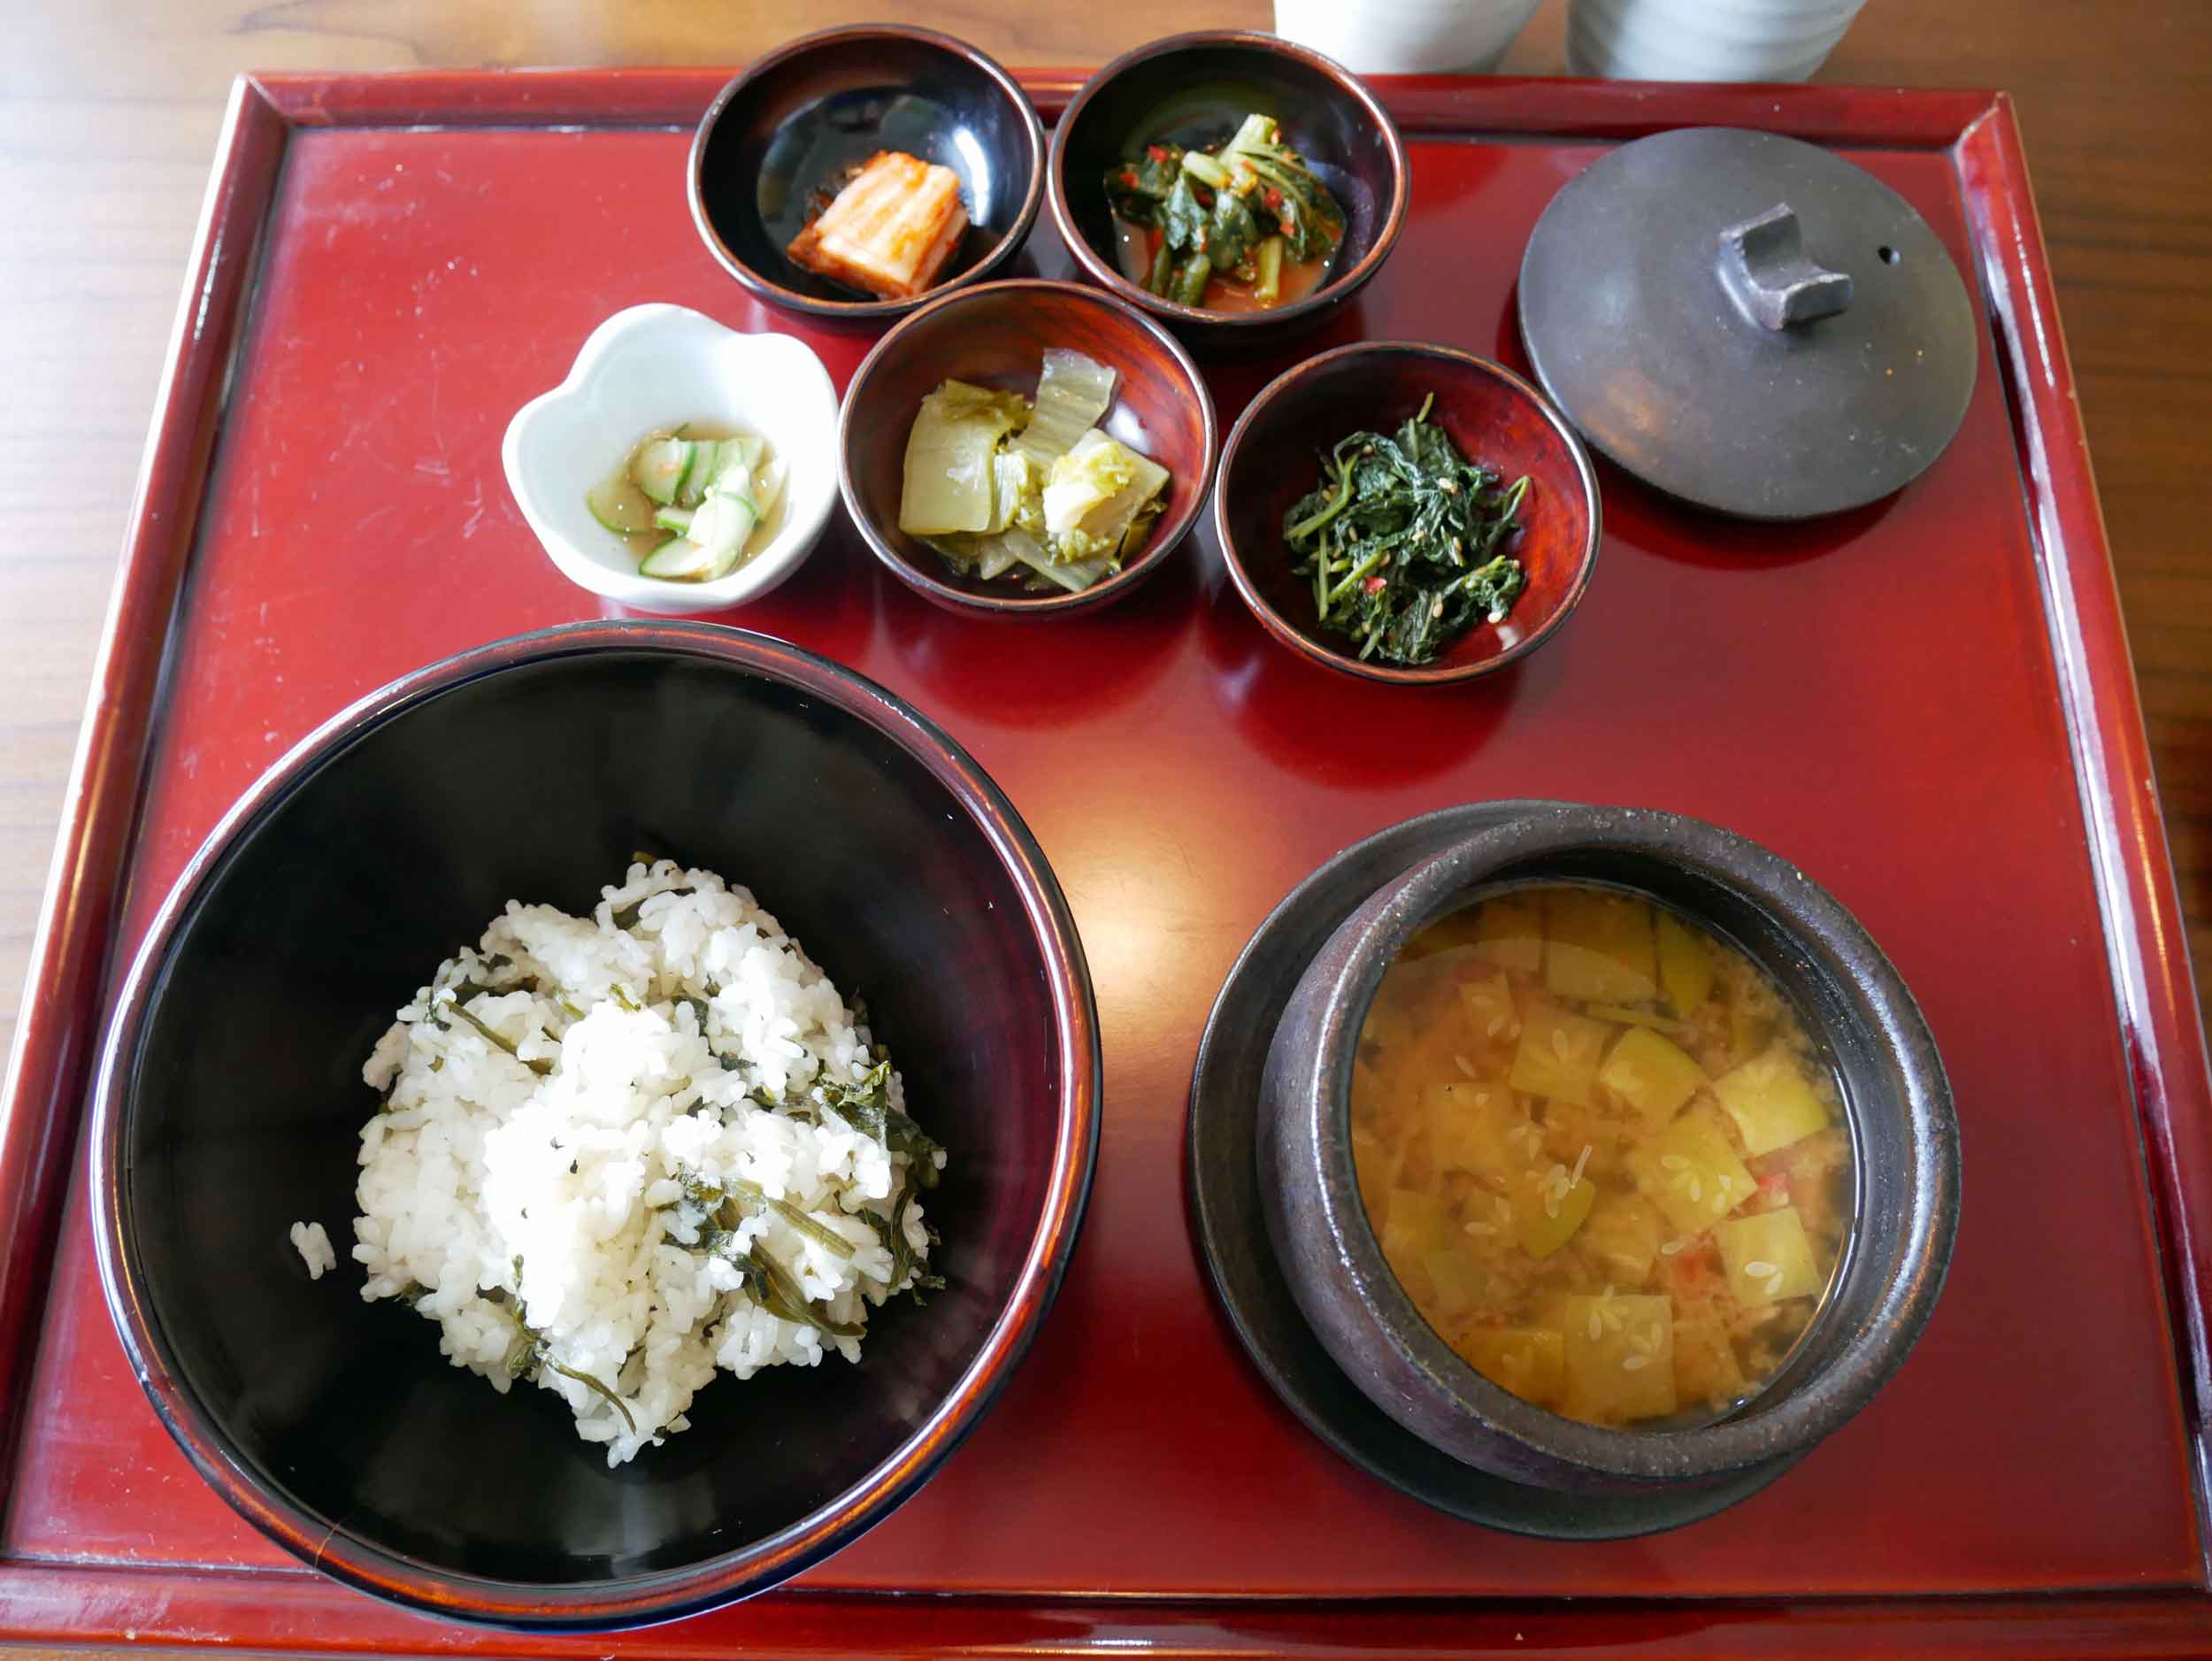  The main course, or  youmi , included seasoned thistle with rice, soy bean paste stew, two kinds of seasoned summer greens, and yangnyeomjang rice sauce. 